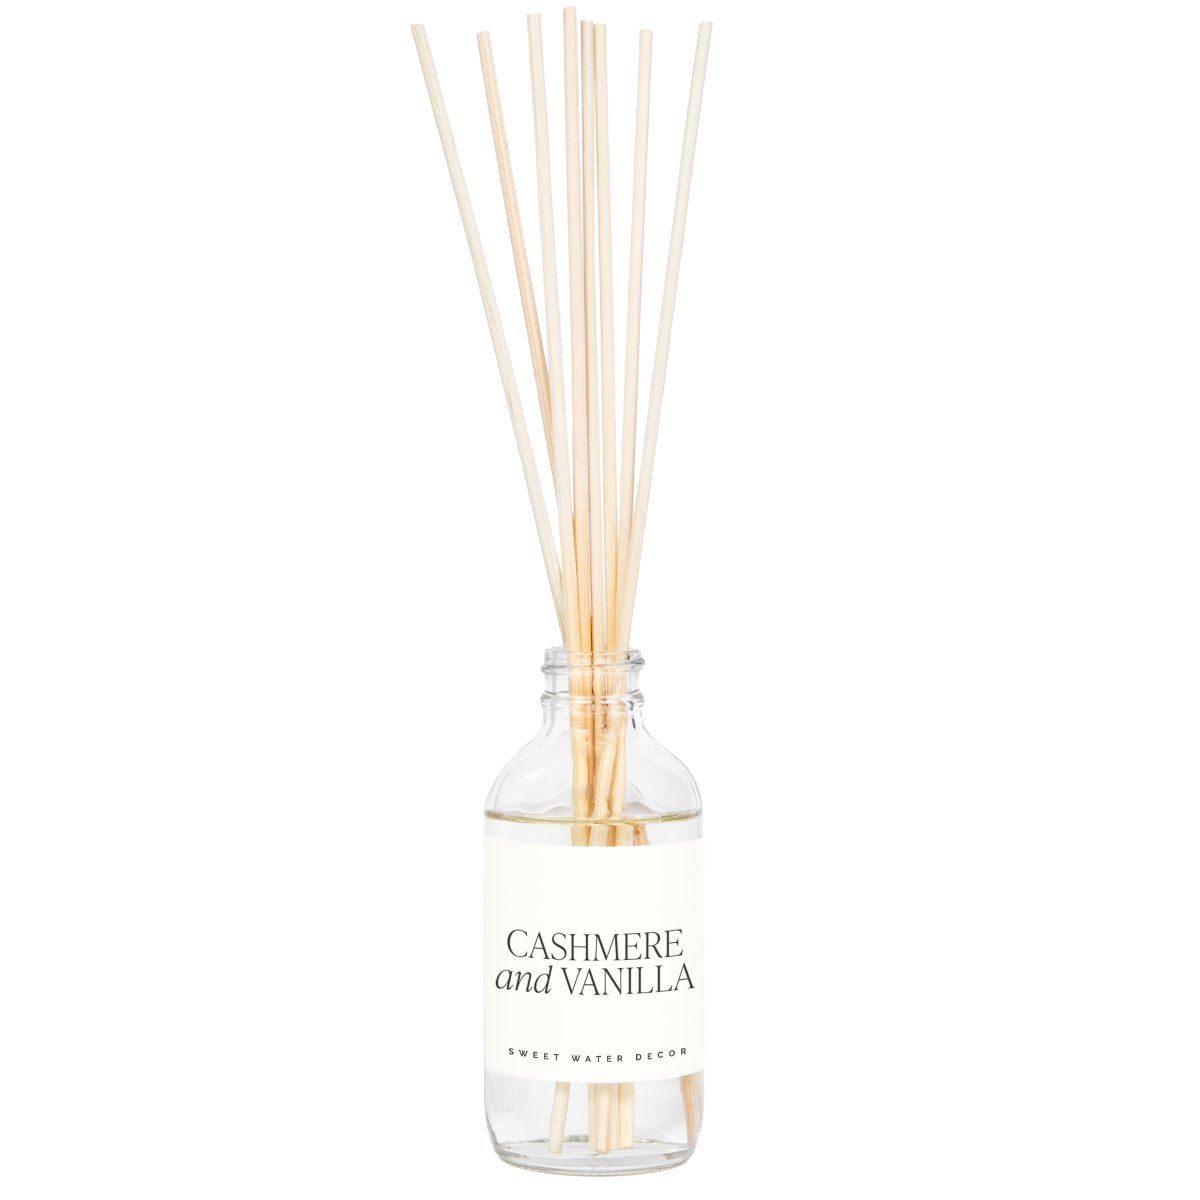 Sweet Water Decor Cashmere and Vanilla Clear Reed Diffuser - lily & onyx